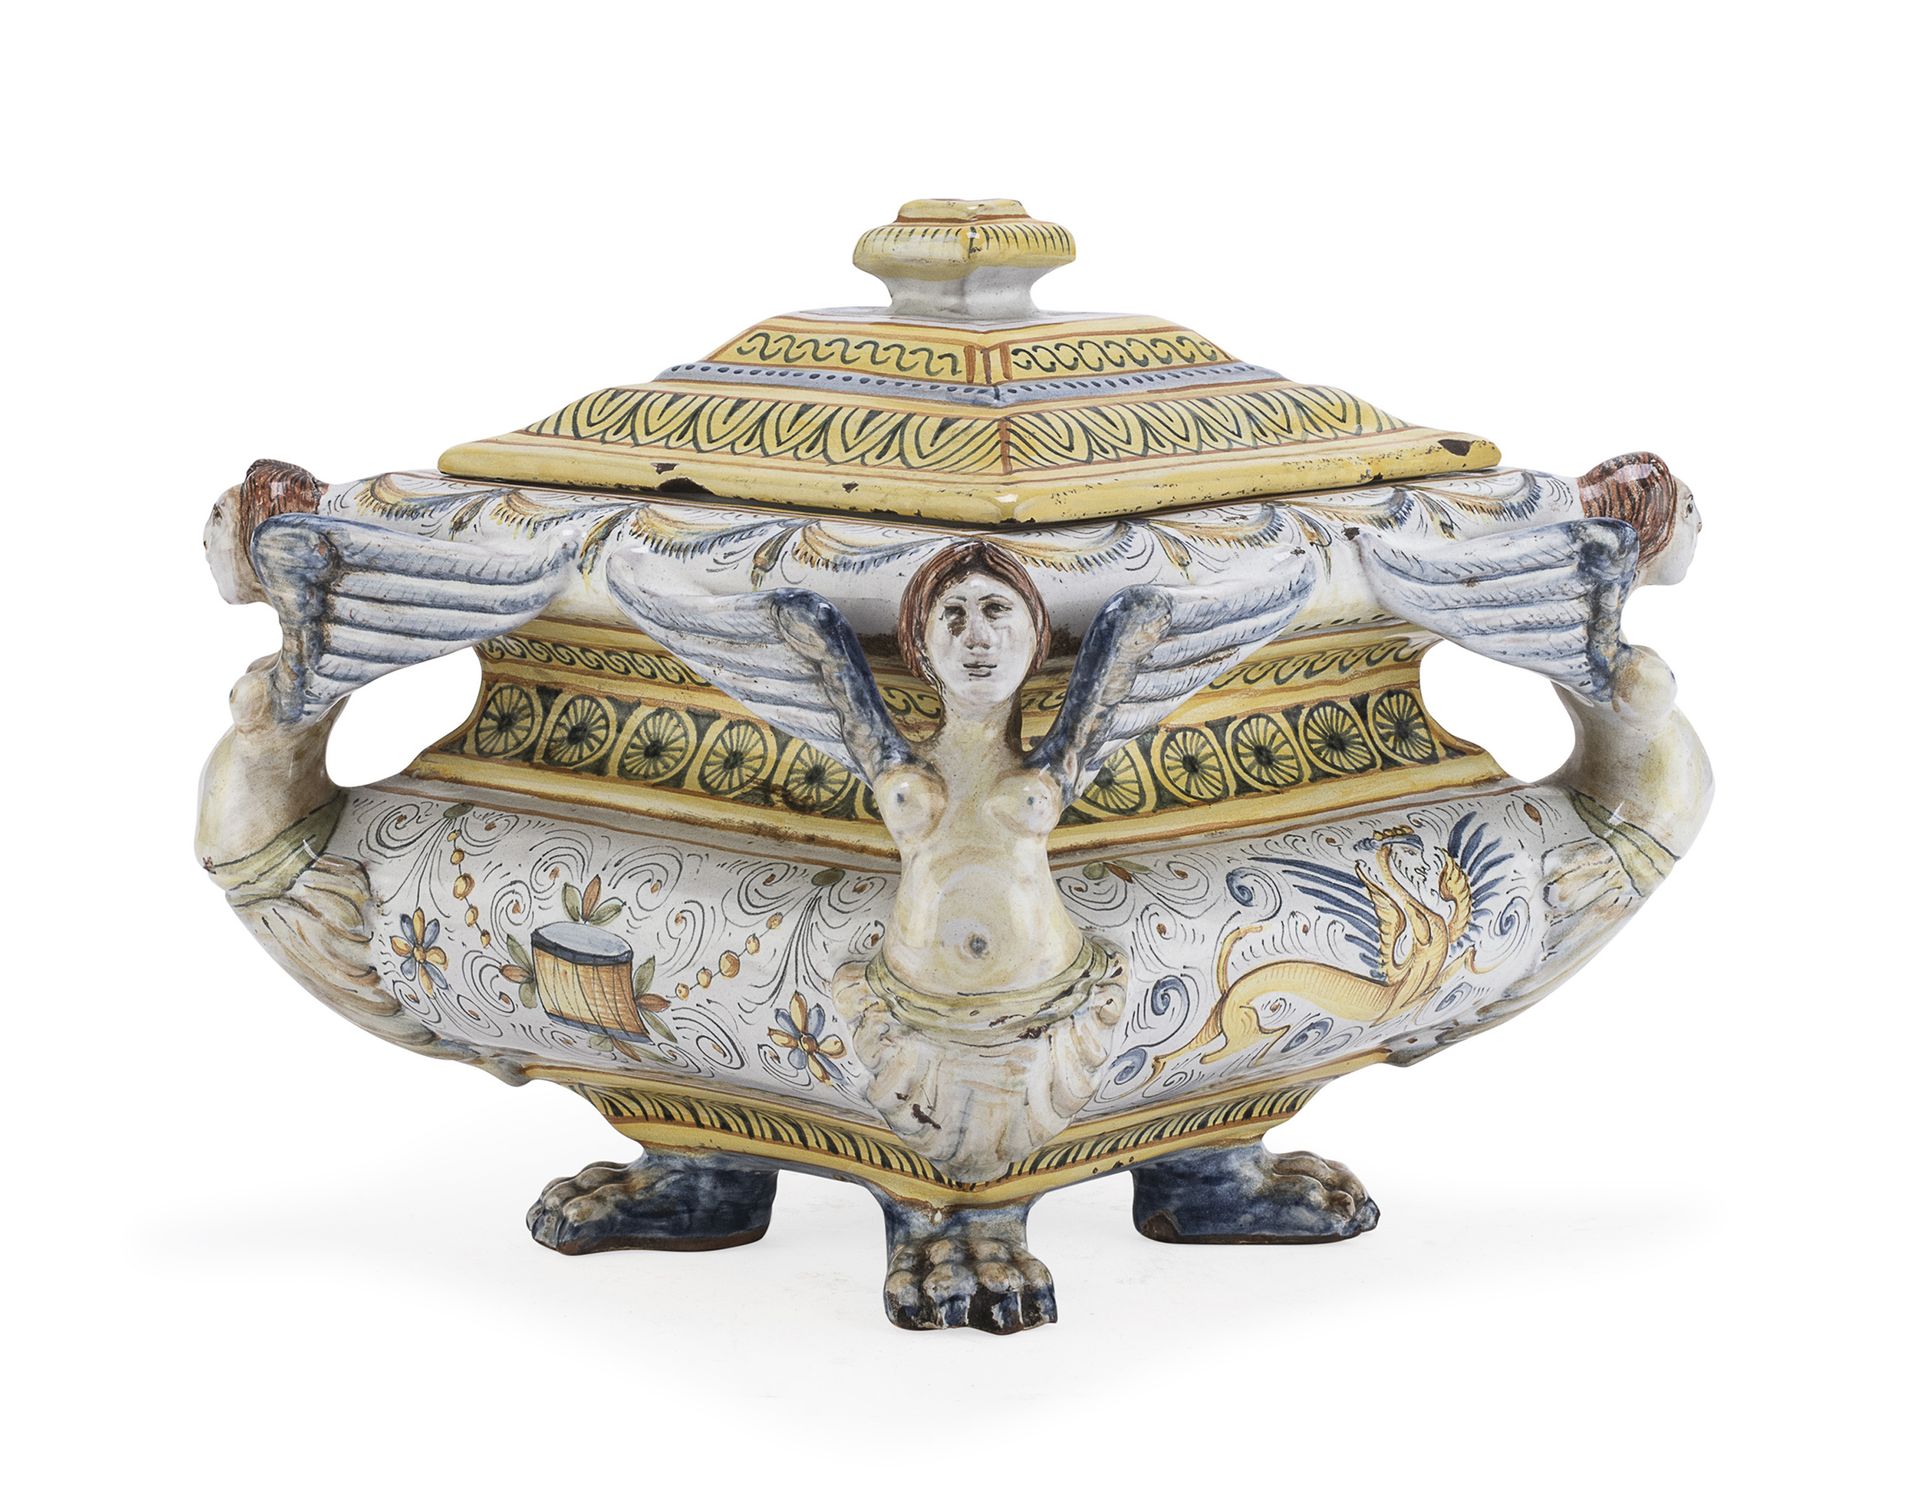 Null MAJOLICA VASE WITH LID, PROBABLY FROM URBINO, XIX CENTURY

à décor polychro&hellip;